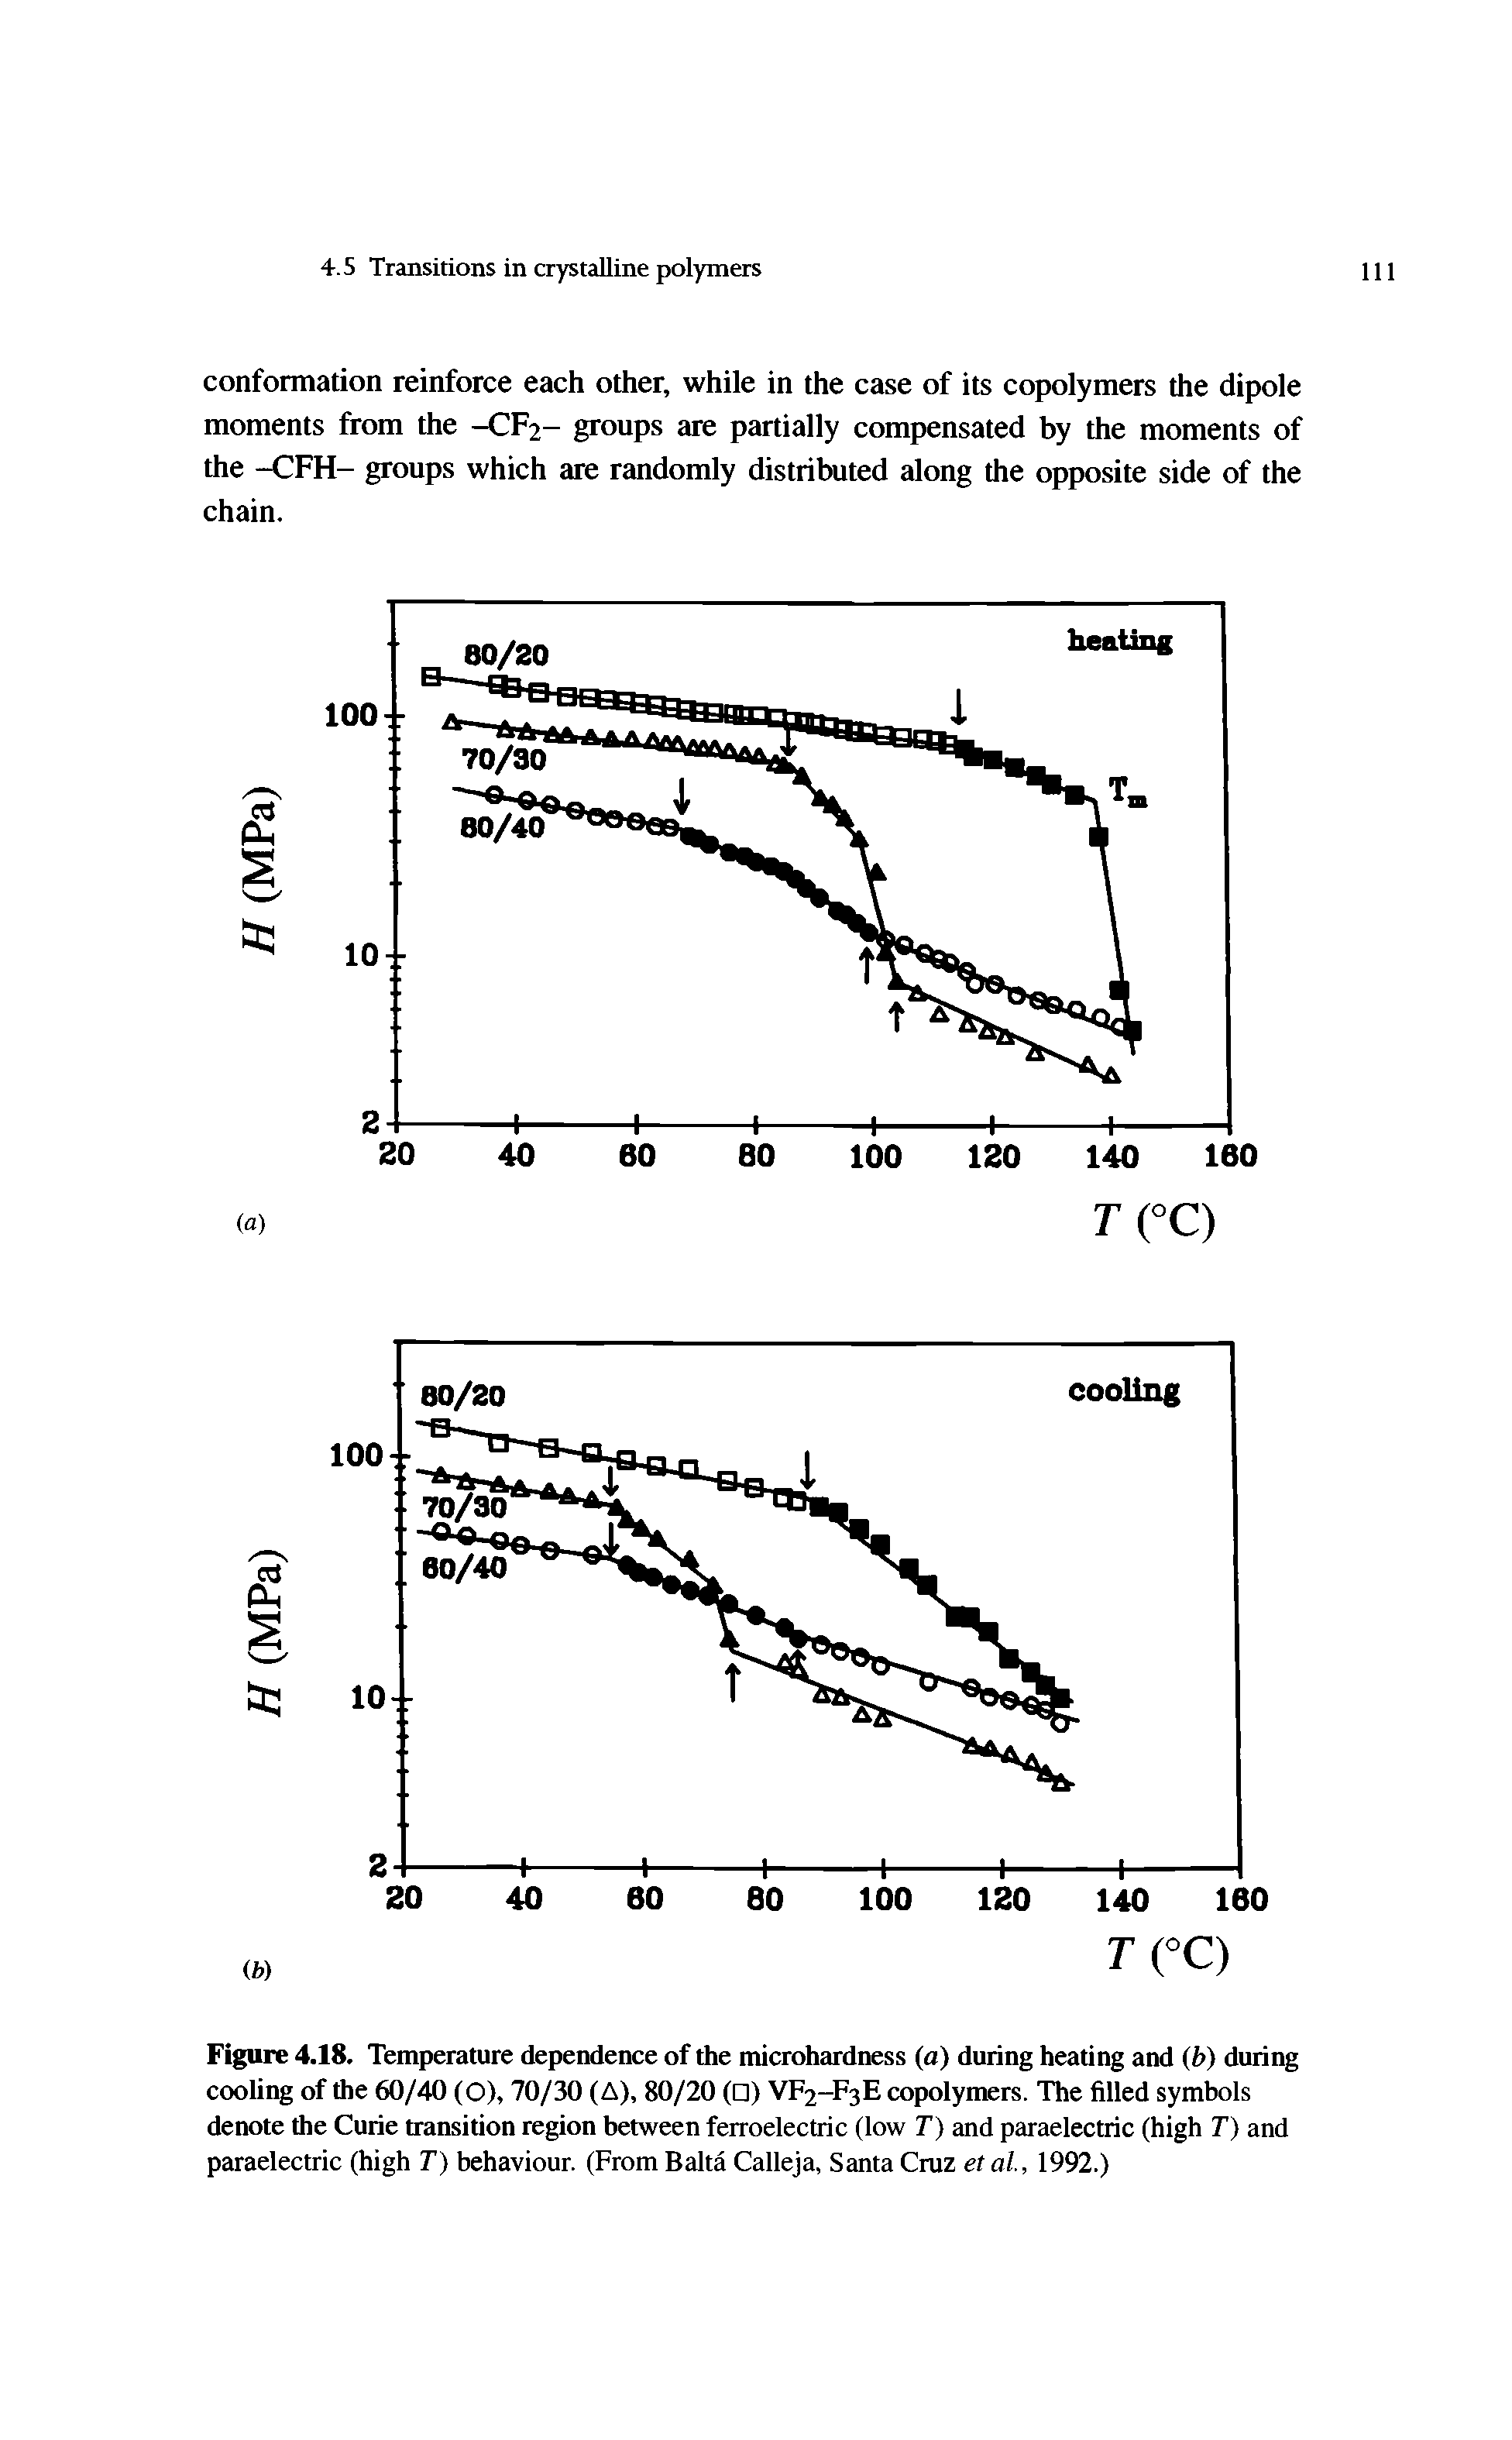 Figure 4.18. Temperature dependence of the microhardness (a) during heating and (b) during cooling of the 60/40 (O), 70/30 (A), 80/20 ( ) VF2-F3E copolymers. The filled symbols denote the Curie transition region between ferroelectric (low T) and paraelectric (high T) and paraelectric (high T) behaviour. (From Balta Calleja, Santa Cruz et al, 1992.)...